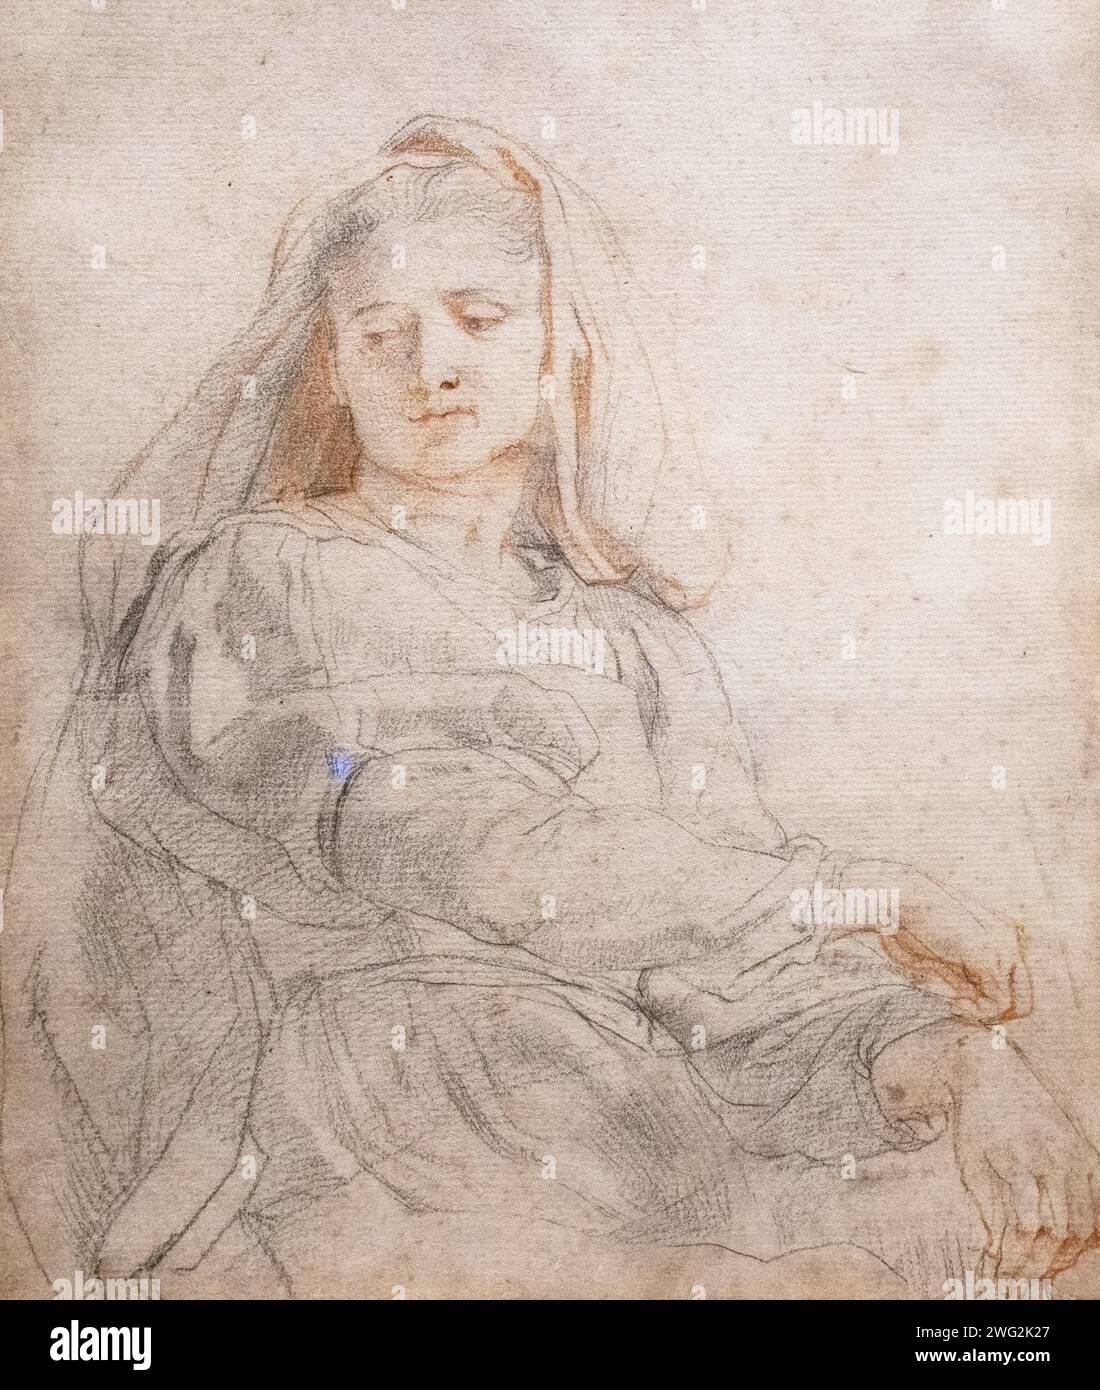 Peter Paul Rubens drawing; 'Study of a seated woman (The Virgin), 1604-5, Black and red chalk, informed the pose of the virgin Mary in later paintings Stock Photo